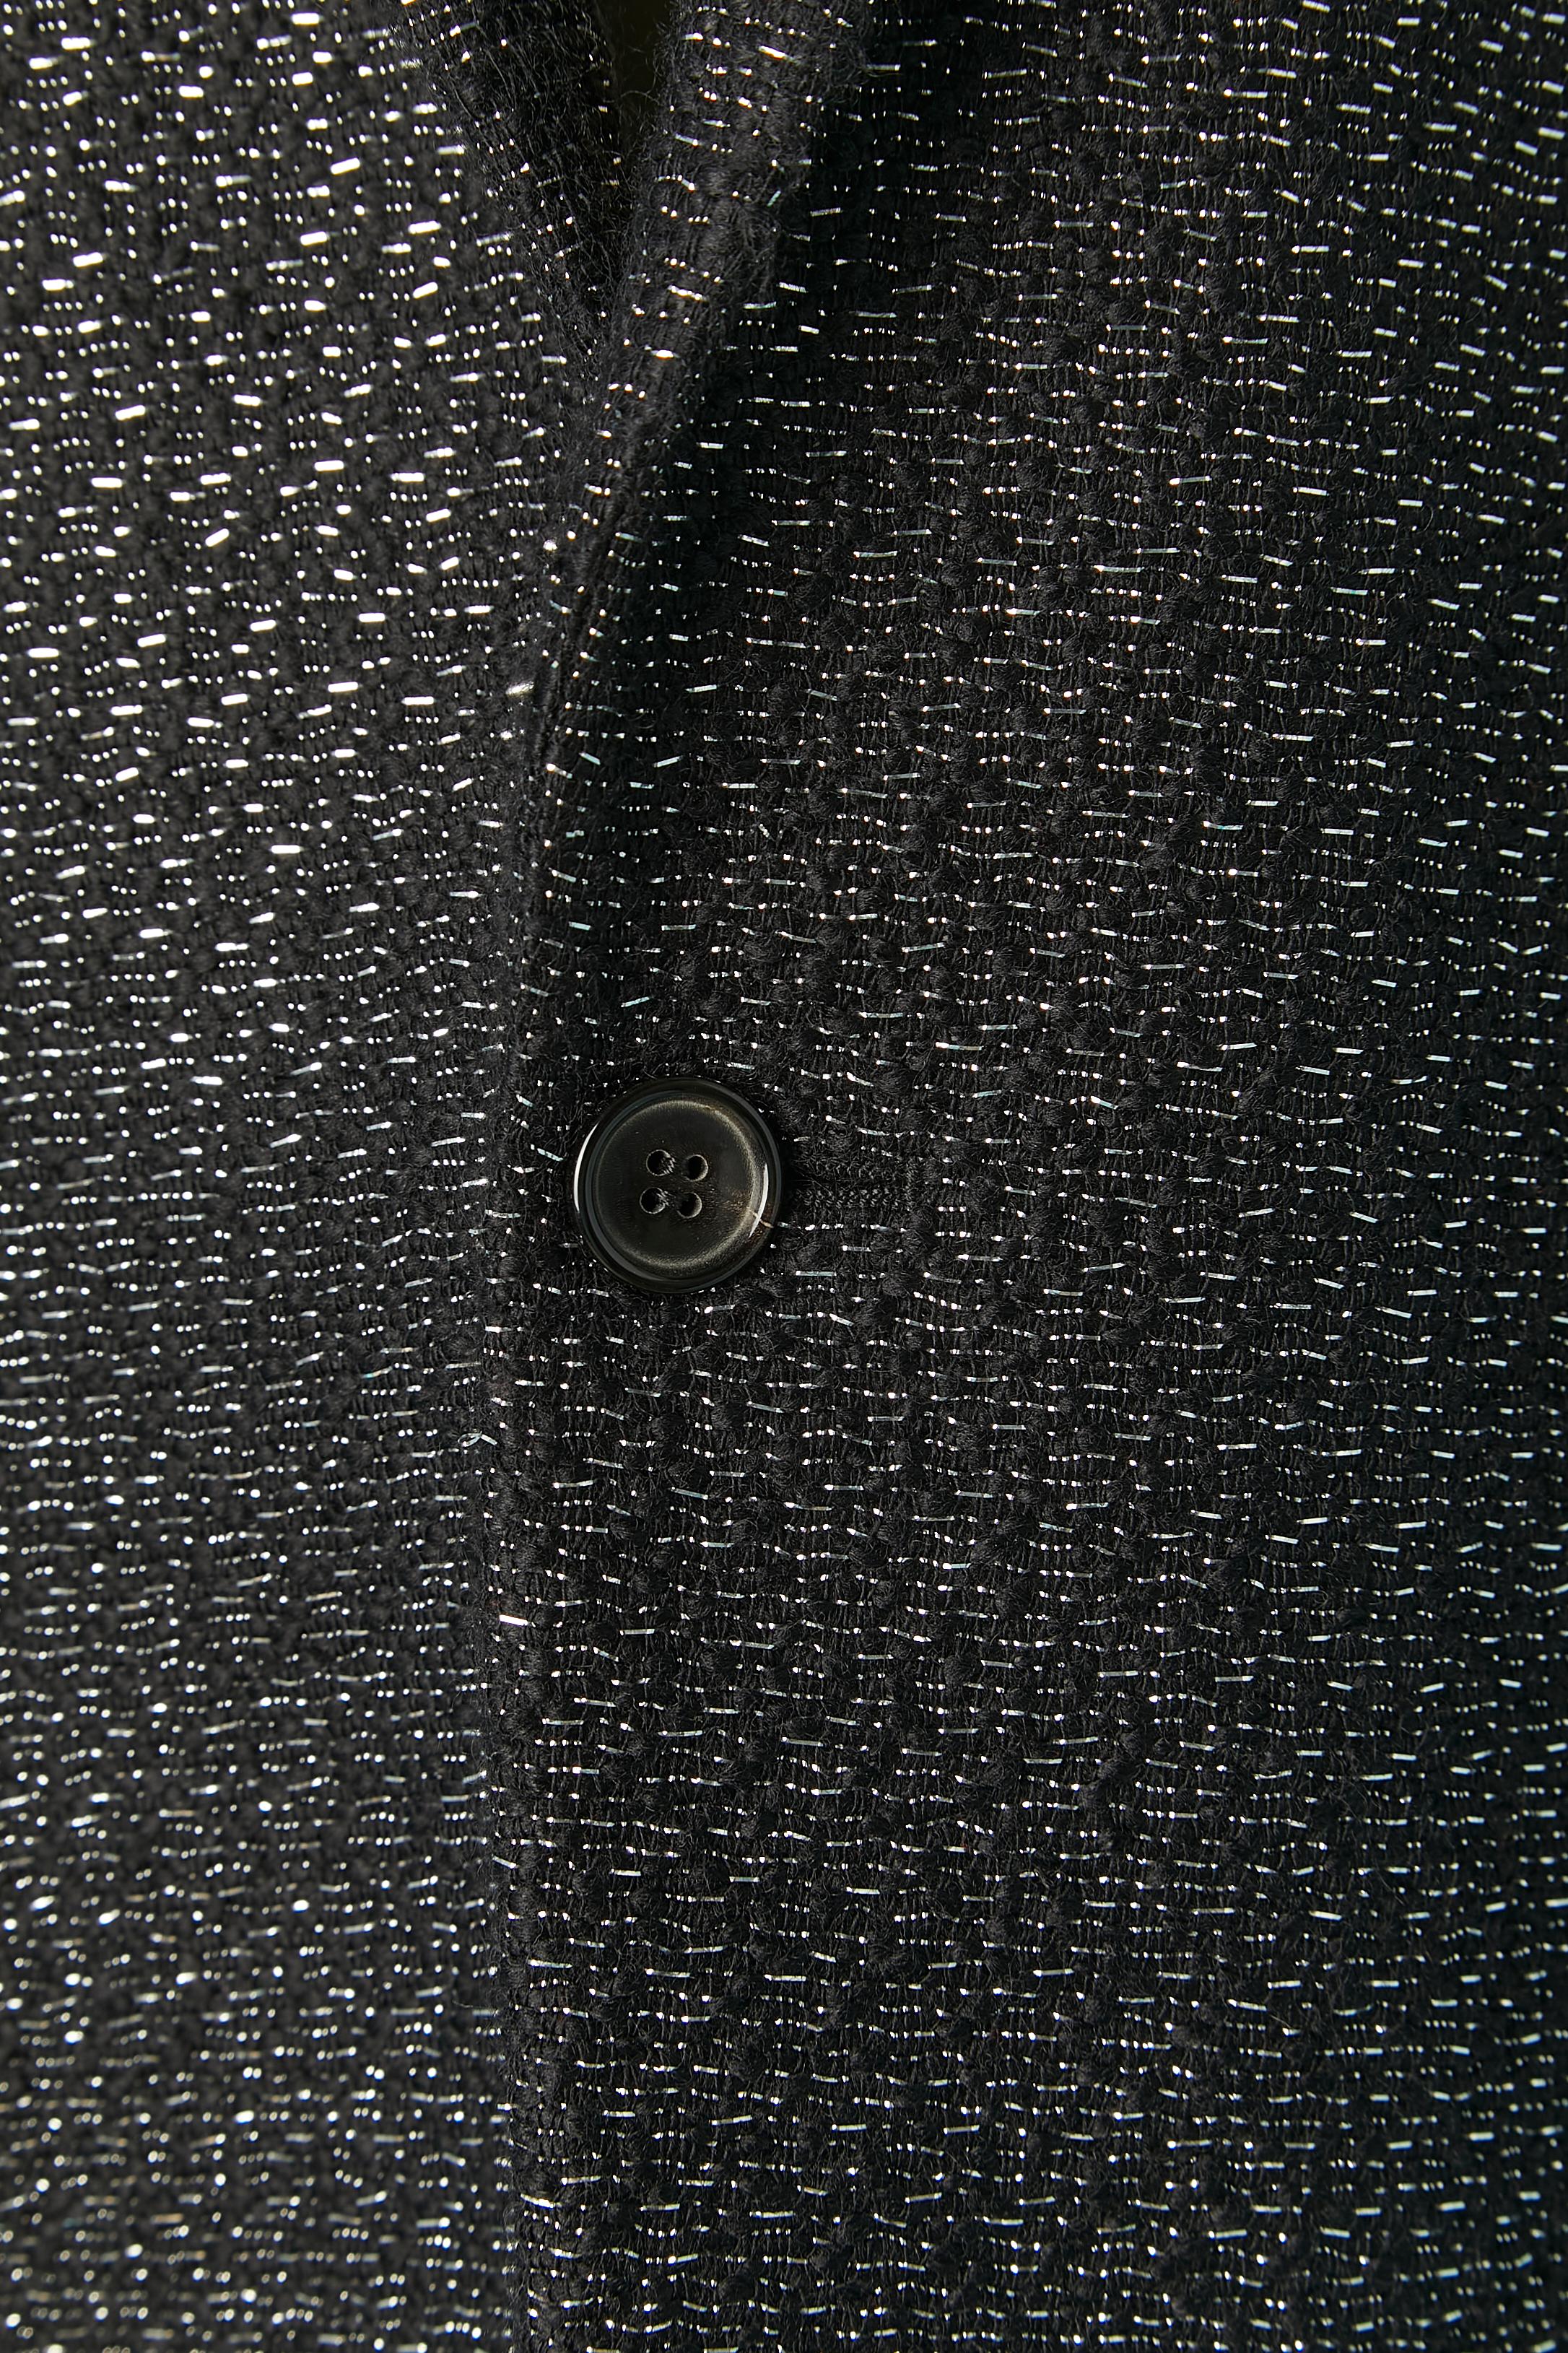 Black wool and silver lurex single breasted blazer. Main fabric composition: 95% wool, 5% polyamide. 
Lining: 100% bemberg
One button and one buttonhole in the middle front. 3 outside pockets and 4 inside pockets. 
SIZE 50